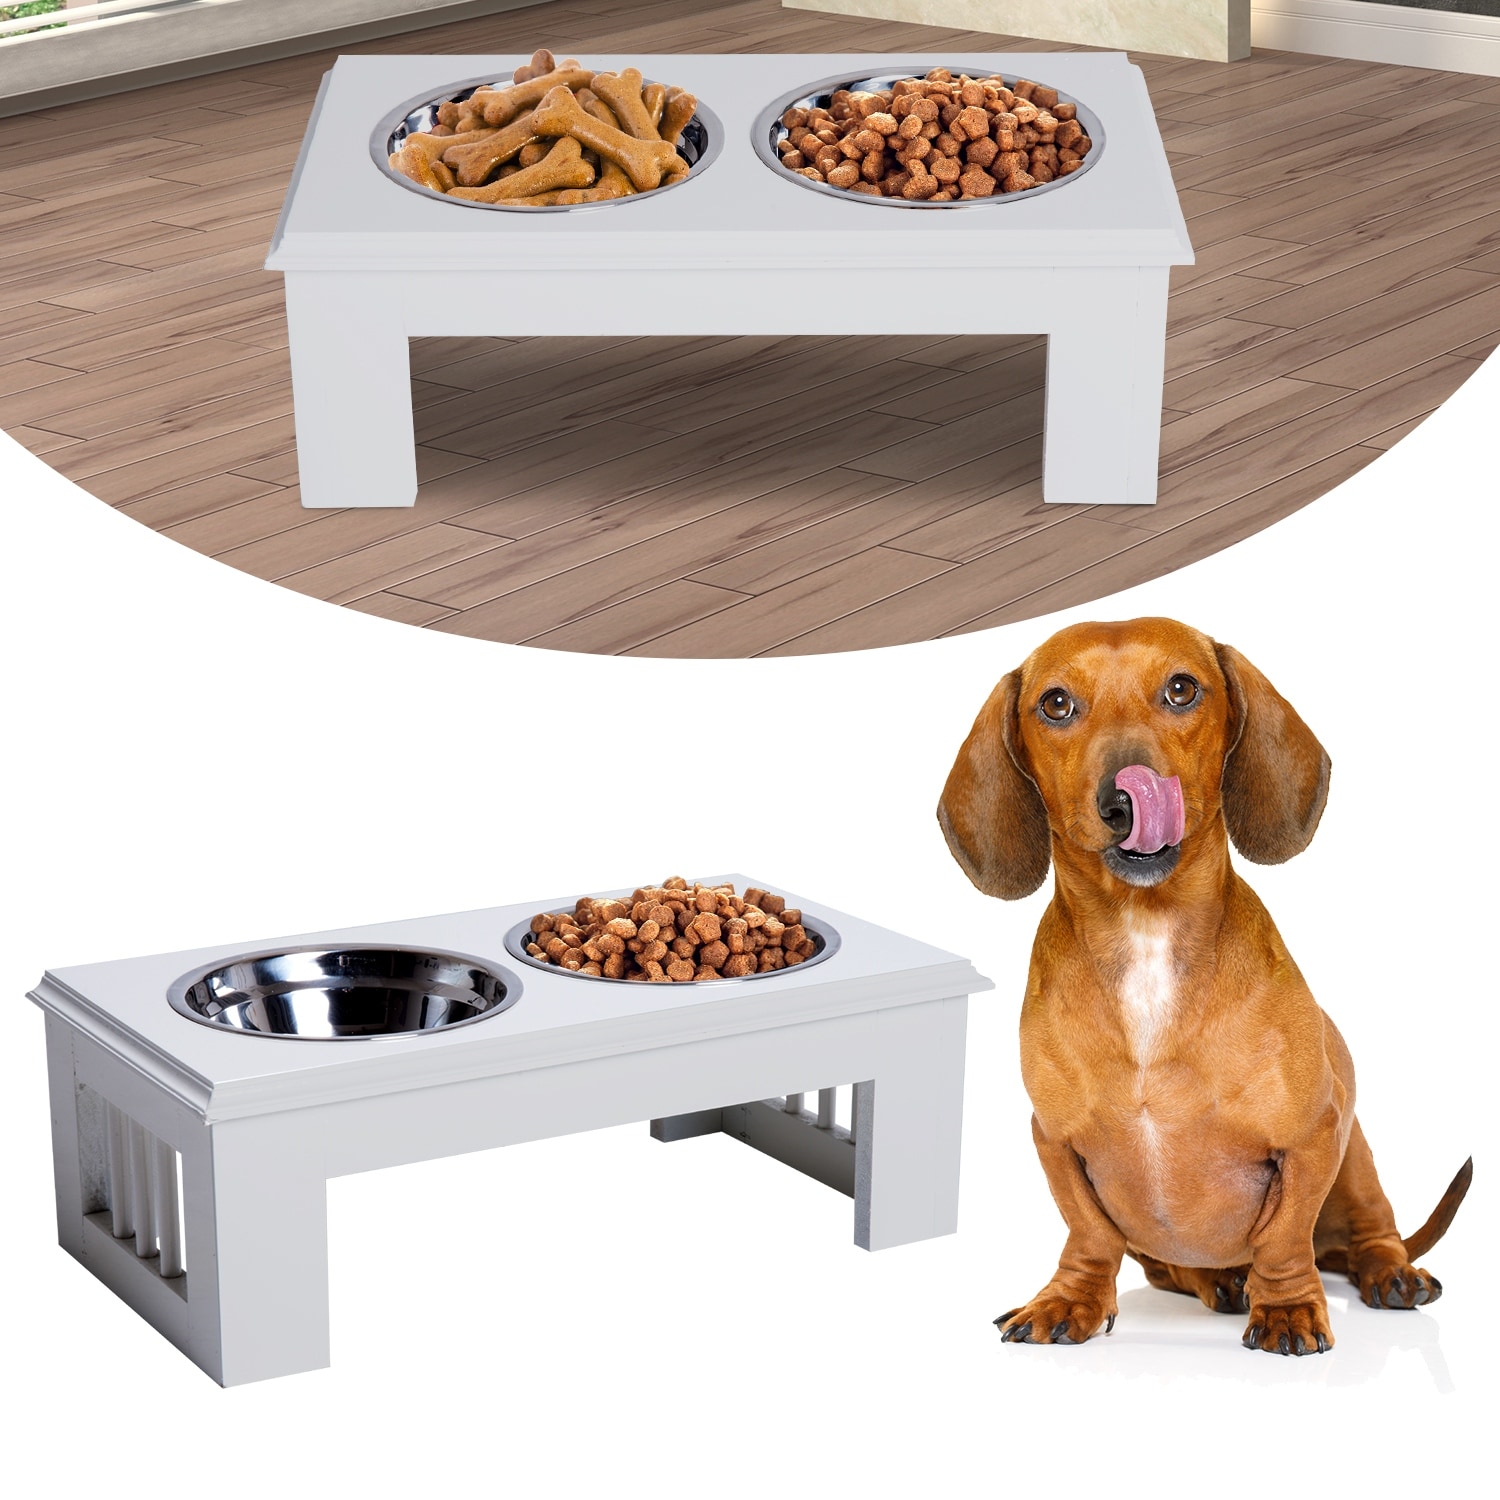 https://ak1.ostkcdn.com/images/products/is/images/direct/28a212abcd65fb1230f1f43da0c1832c7dc853cb/PawHut-17%22-Dog-Feeding-Station-with-2-Food-Bowls%2C-White.jpg